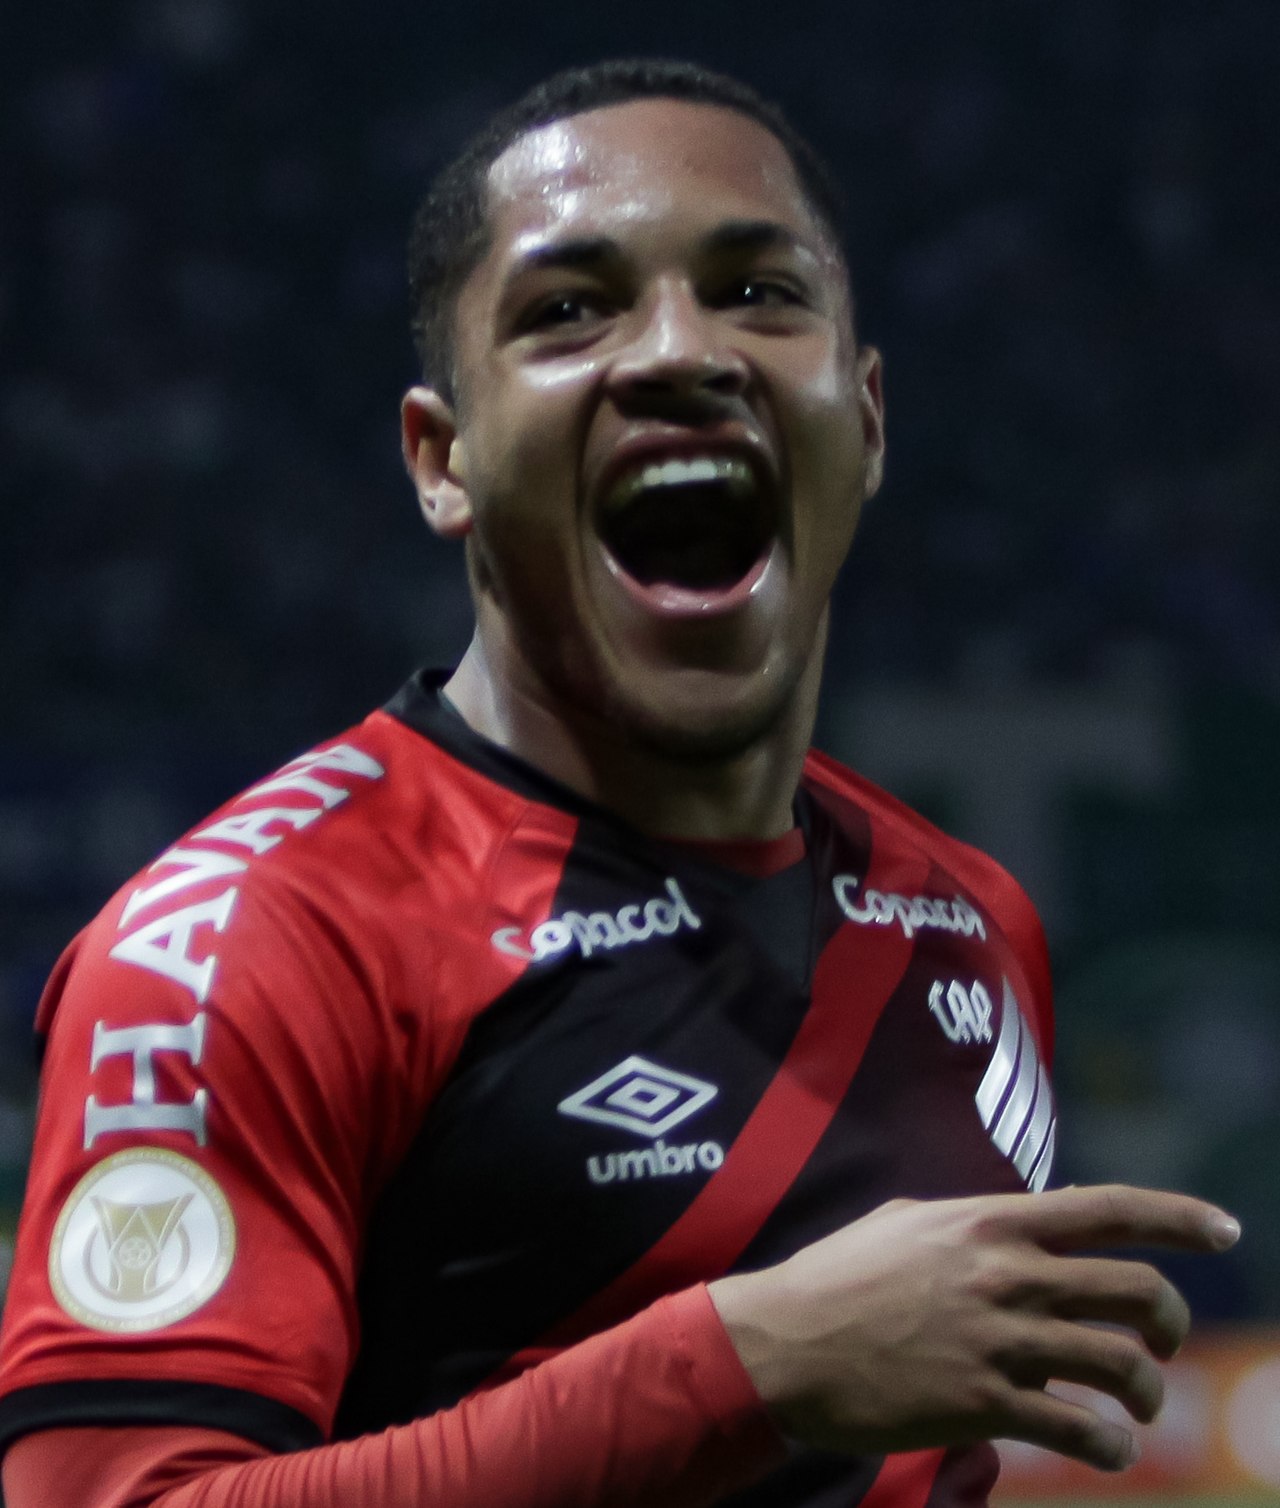 Barcelona is going to acquire Brazil's 18-year-old talent Roque